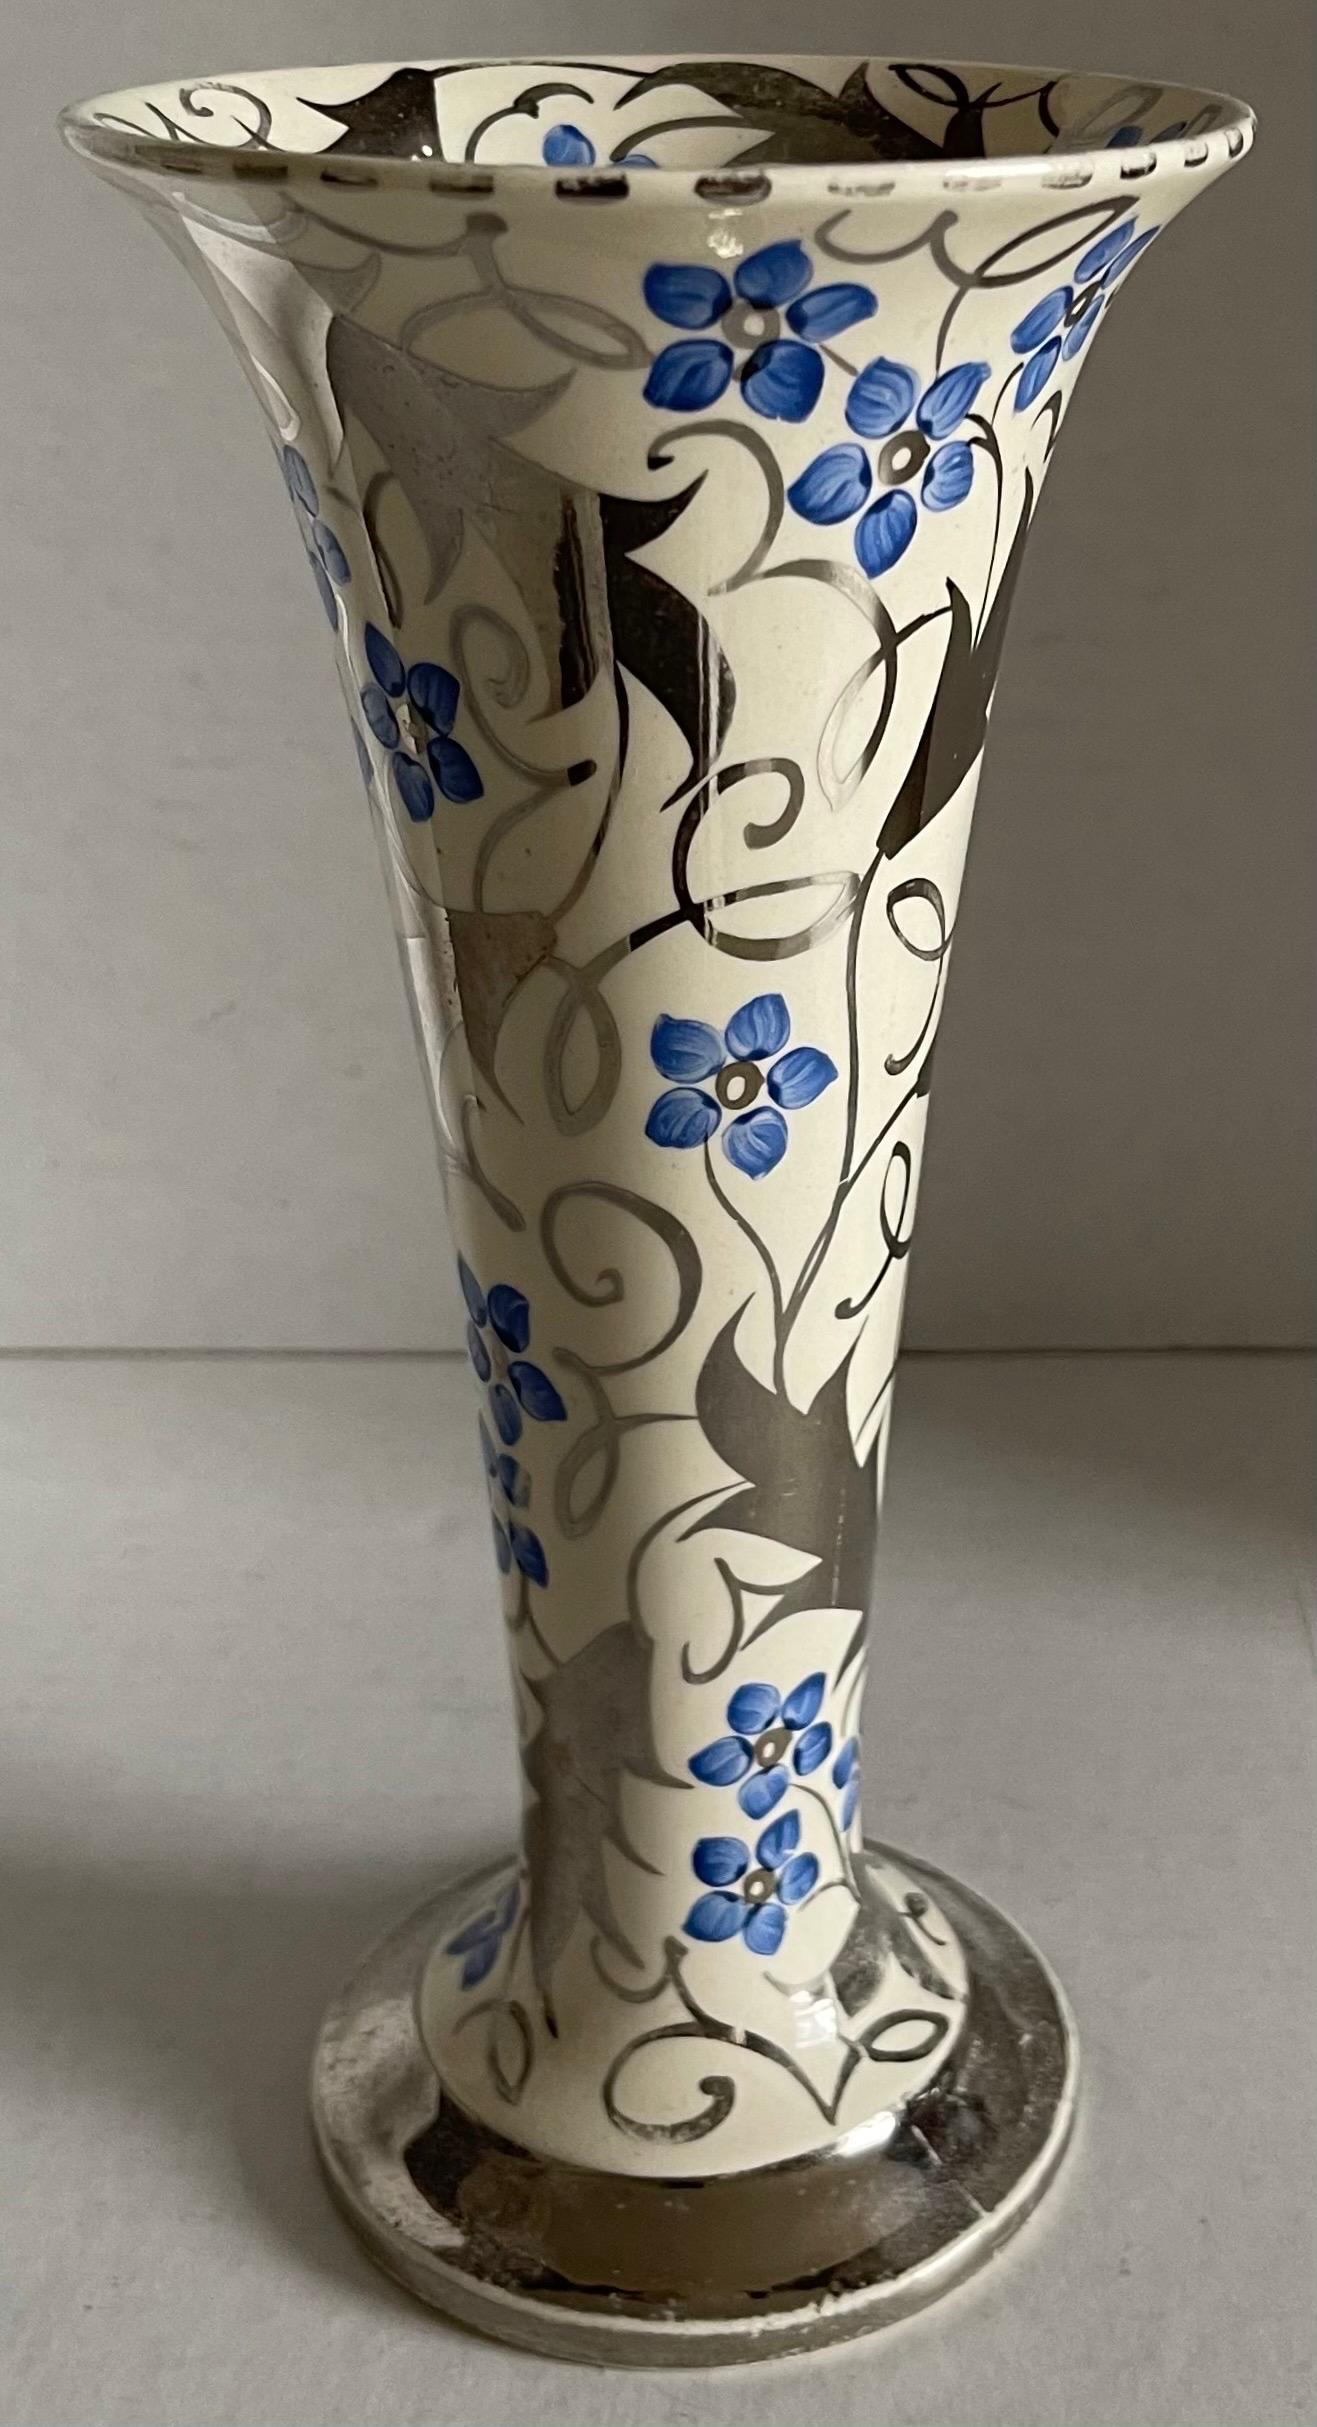 Antique 1930s Wedgwood lustre ware trumpet vase. Bone China with hand painted silver and blue floral design. Brand stamp on the underside. 